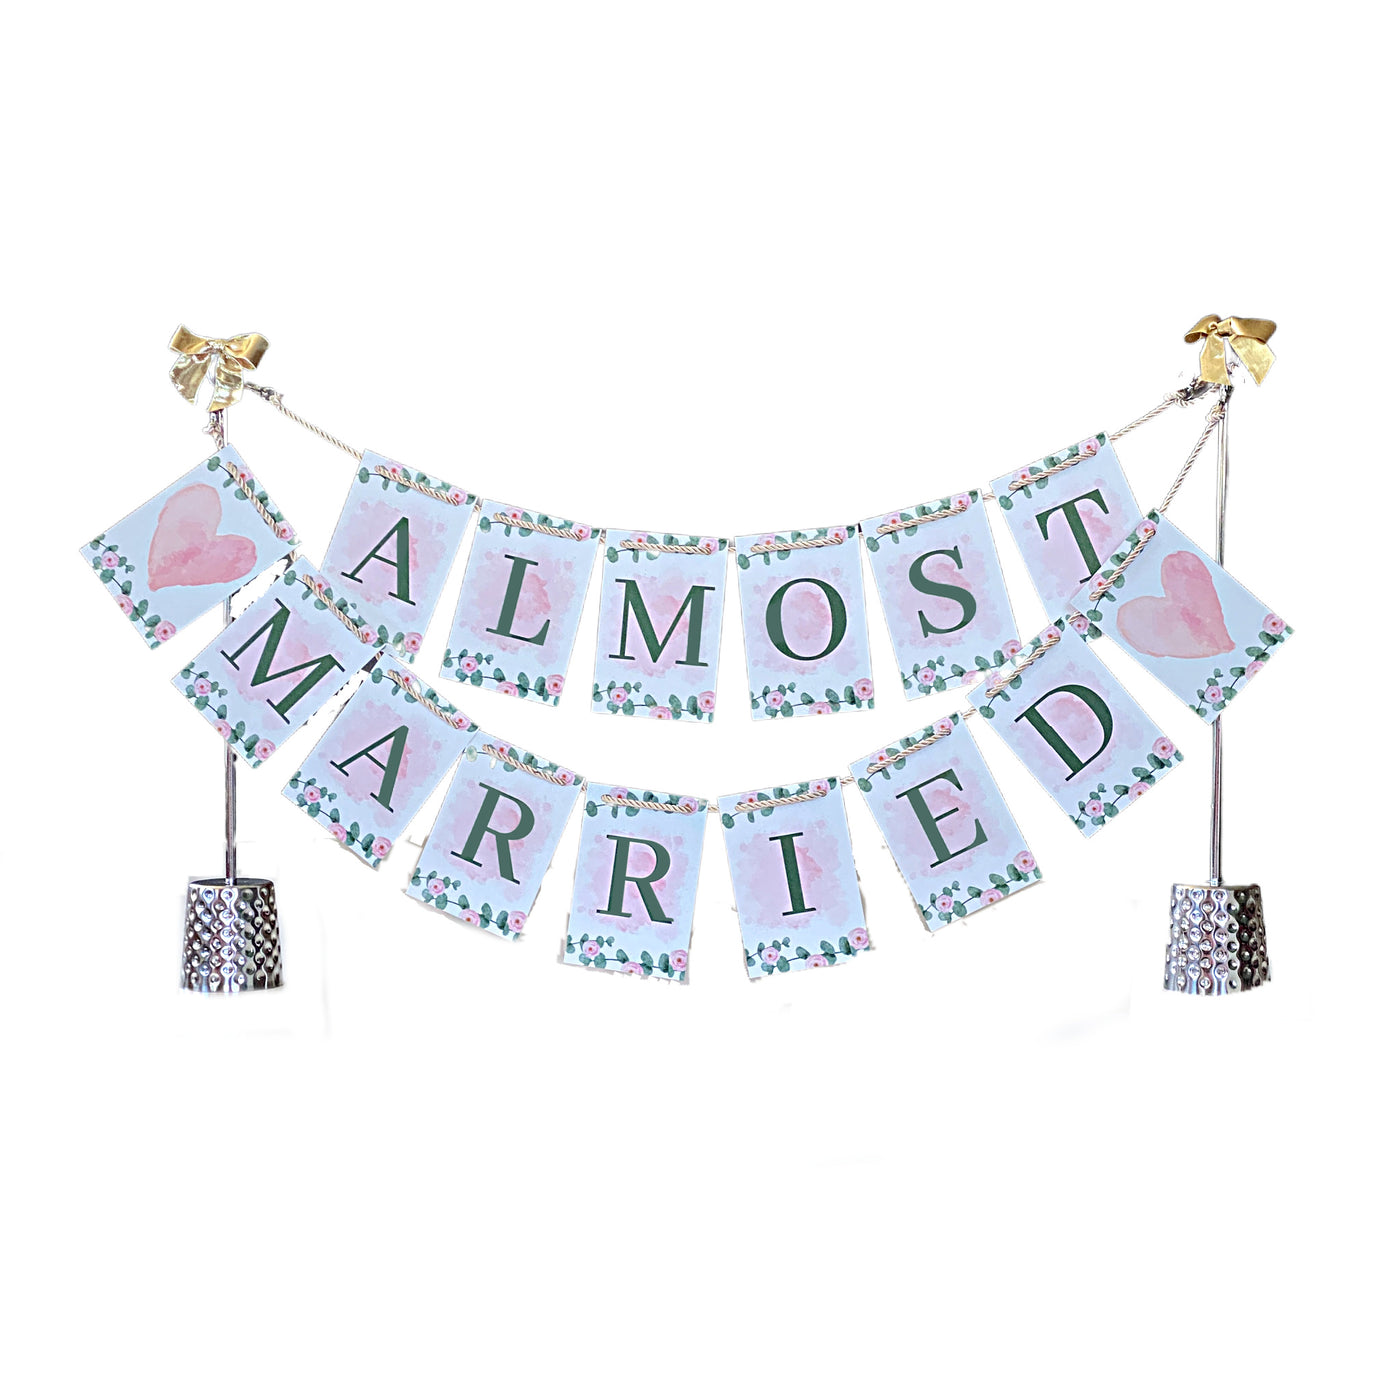 Almost Married banner for Bridal Shower (perfect for wedding too! - add on 'Just' banner)